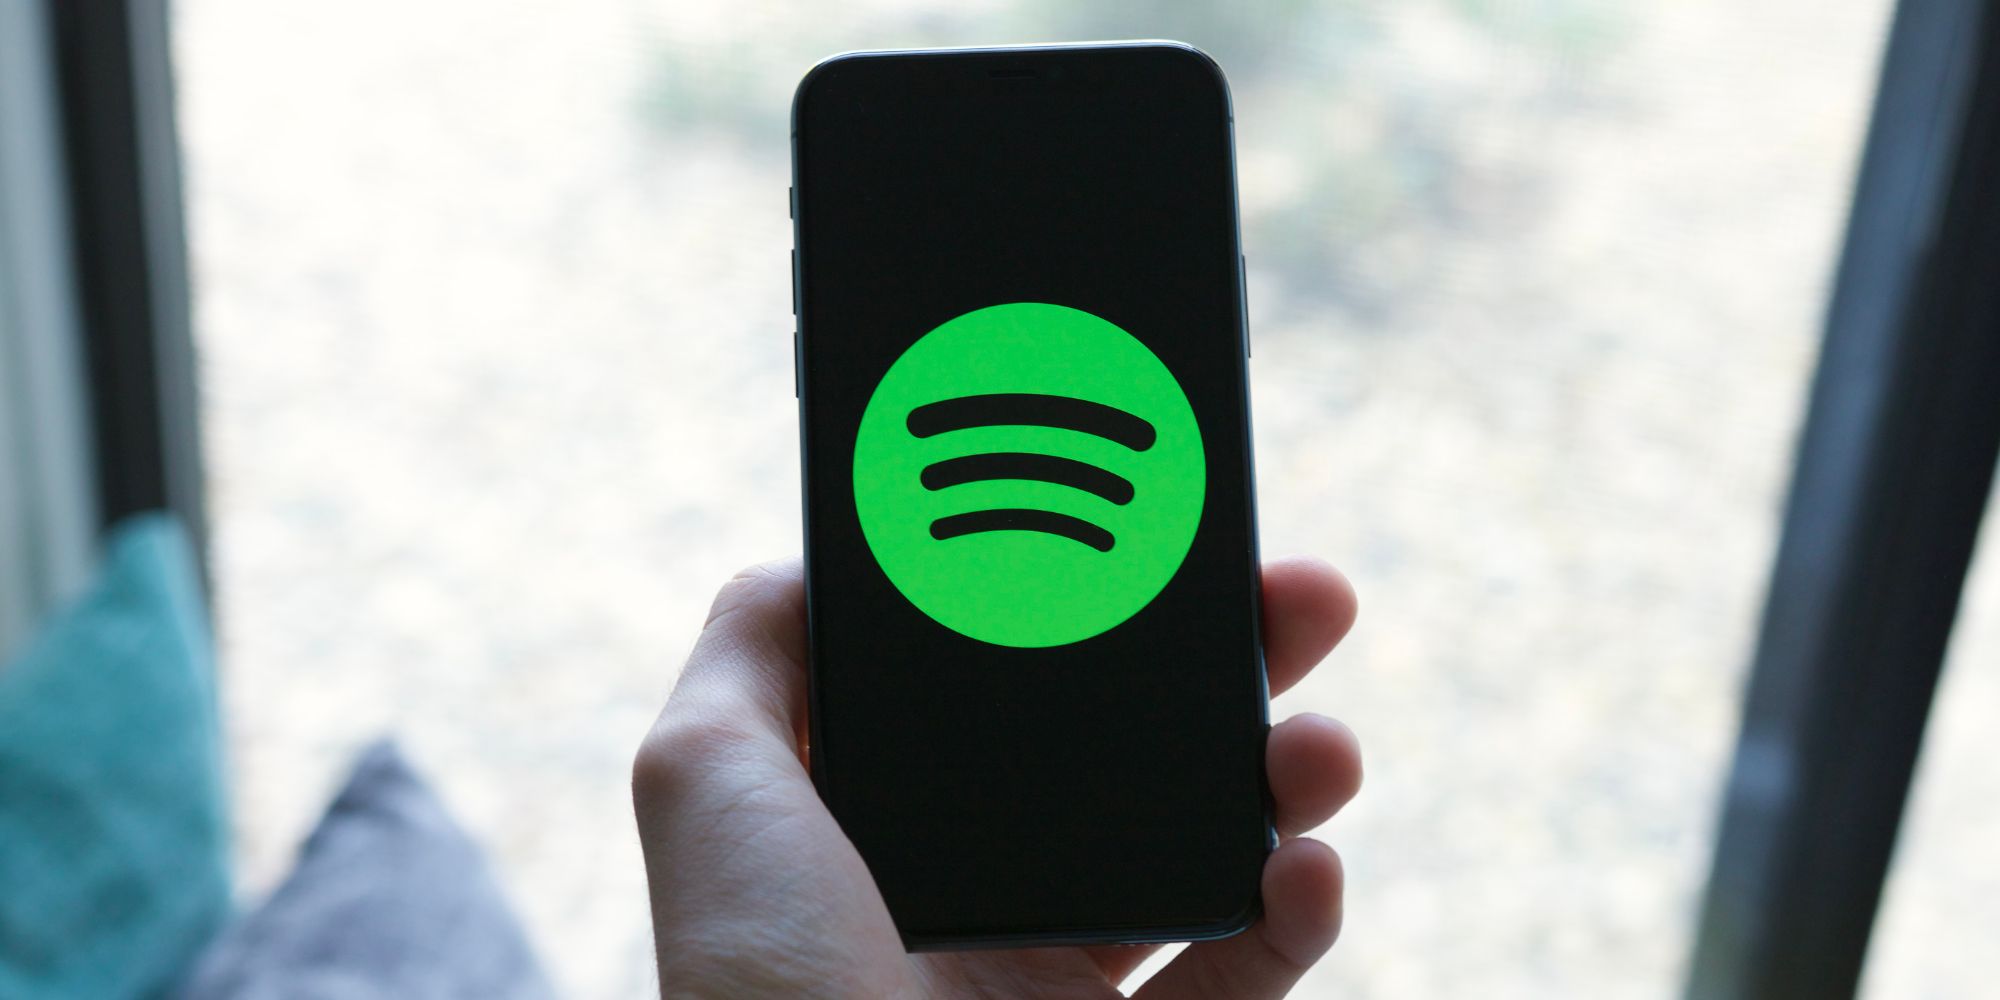 Spotify logo on an iPhone